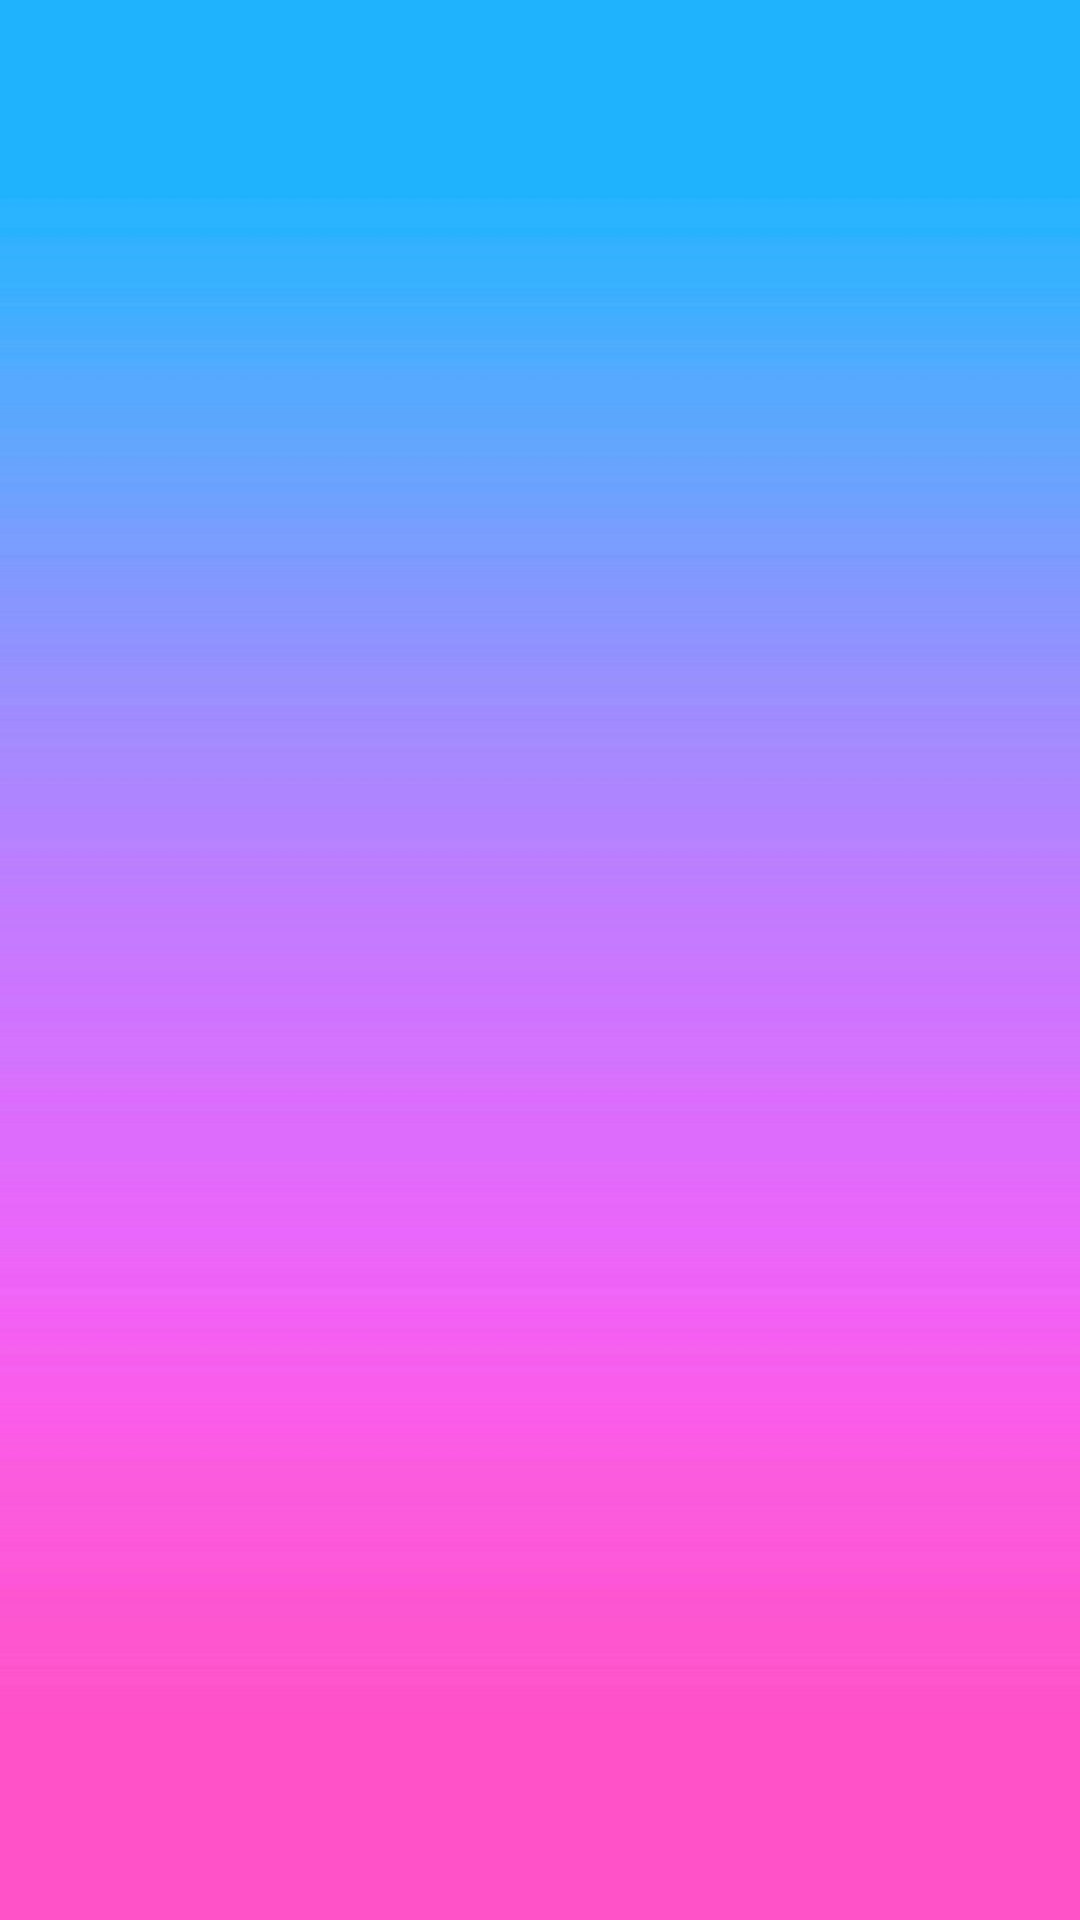 Gradient iPhone Wallpaper with high-resolution 1080x1920 pixel. You can use this wallpaper for your iPhone 5, 6, 7, 8, X, XS, XR backgrounds, Mobile Screensaver, or iPad Lock Screen